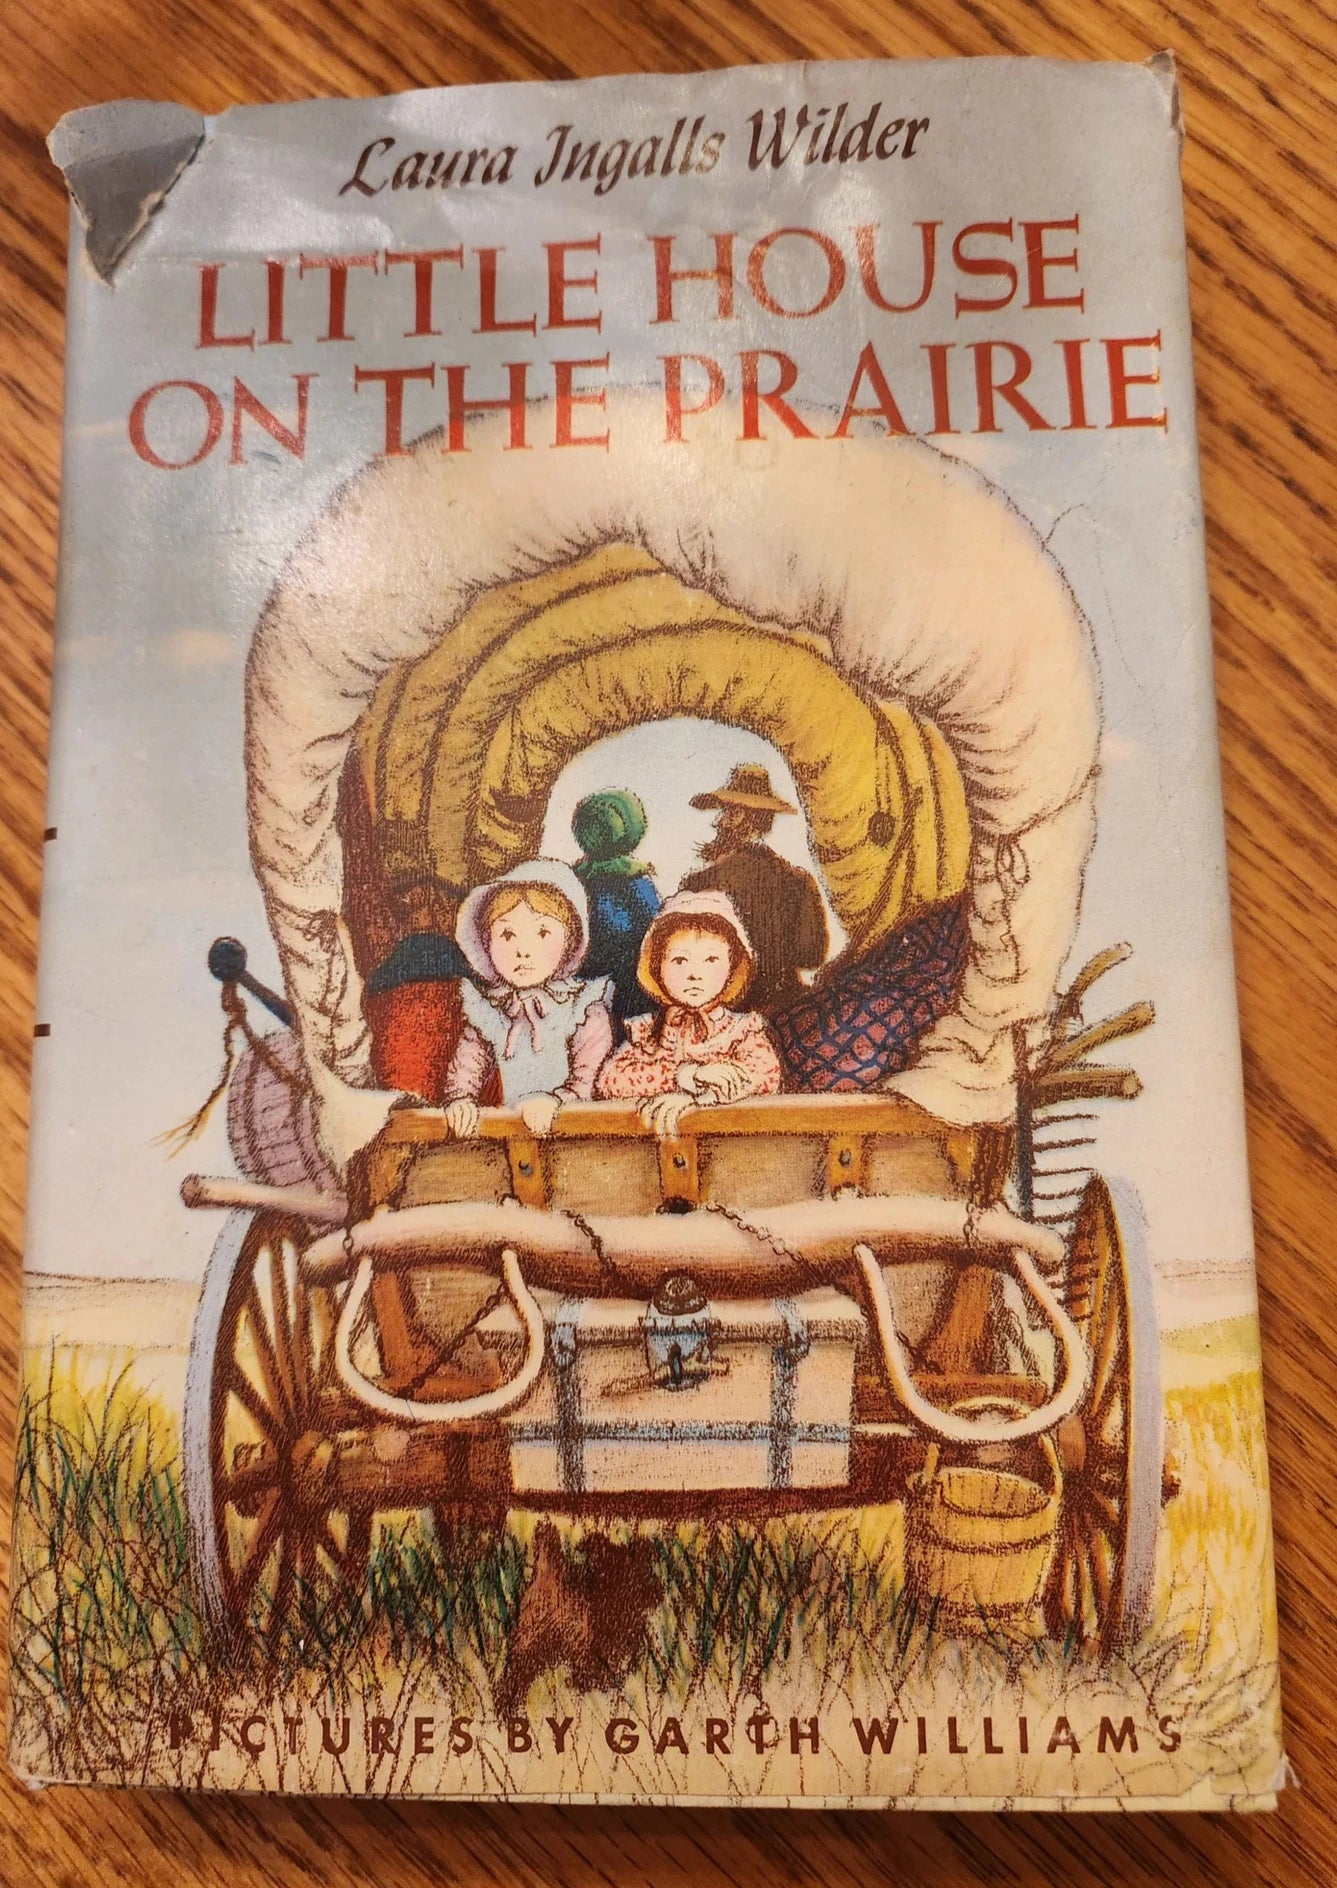 Little House on the Prairie - Laura Ingalls Wilder; Signed by Illustrator, Garth Williams - Dead Tree Dreams Bookstore